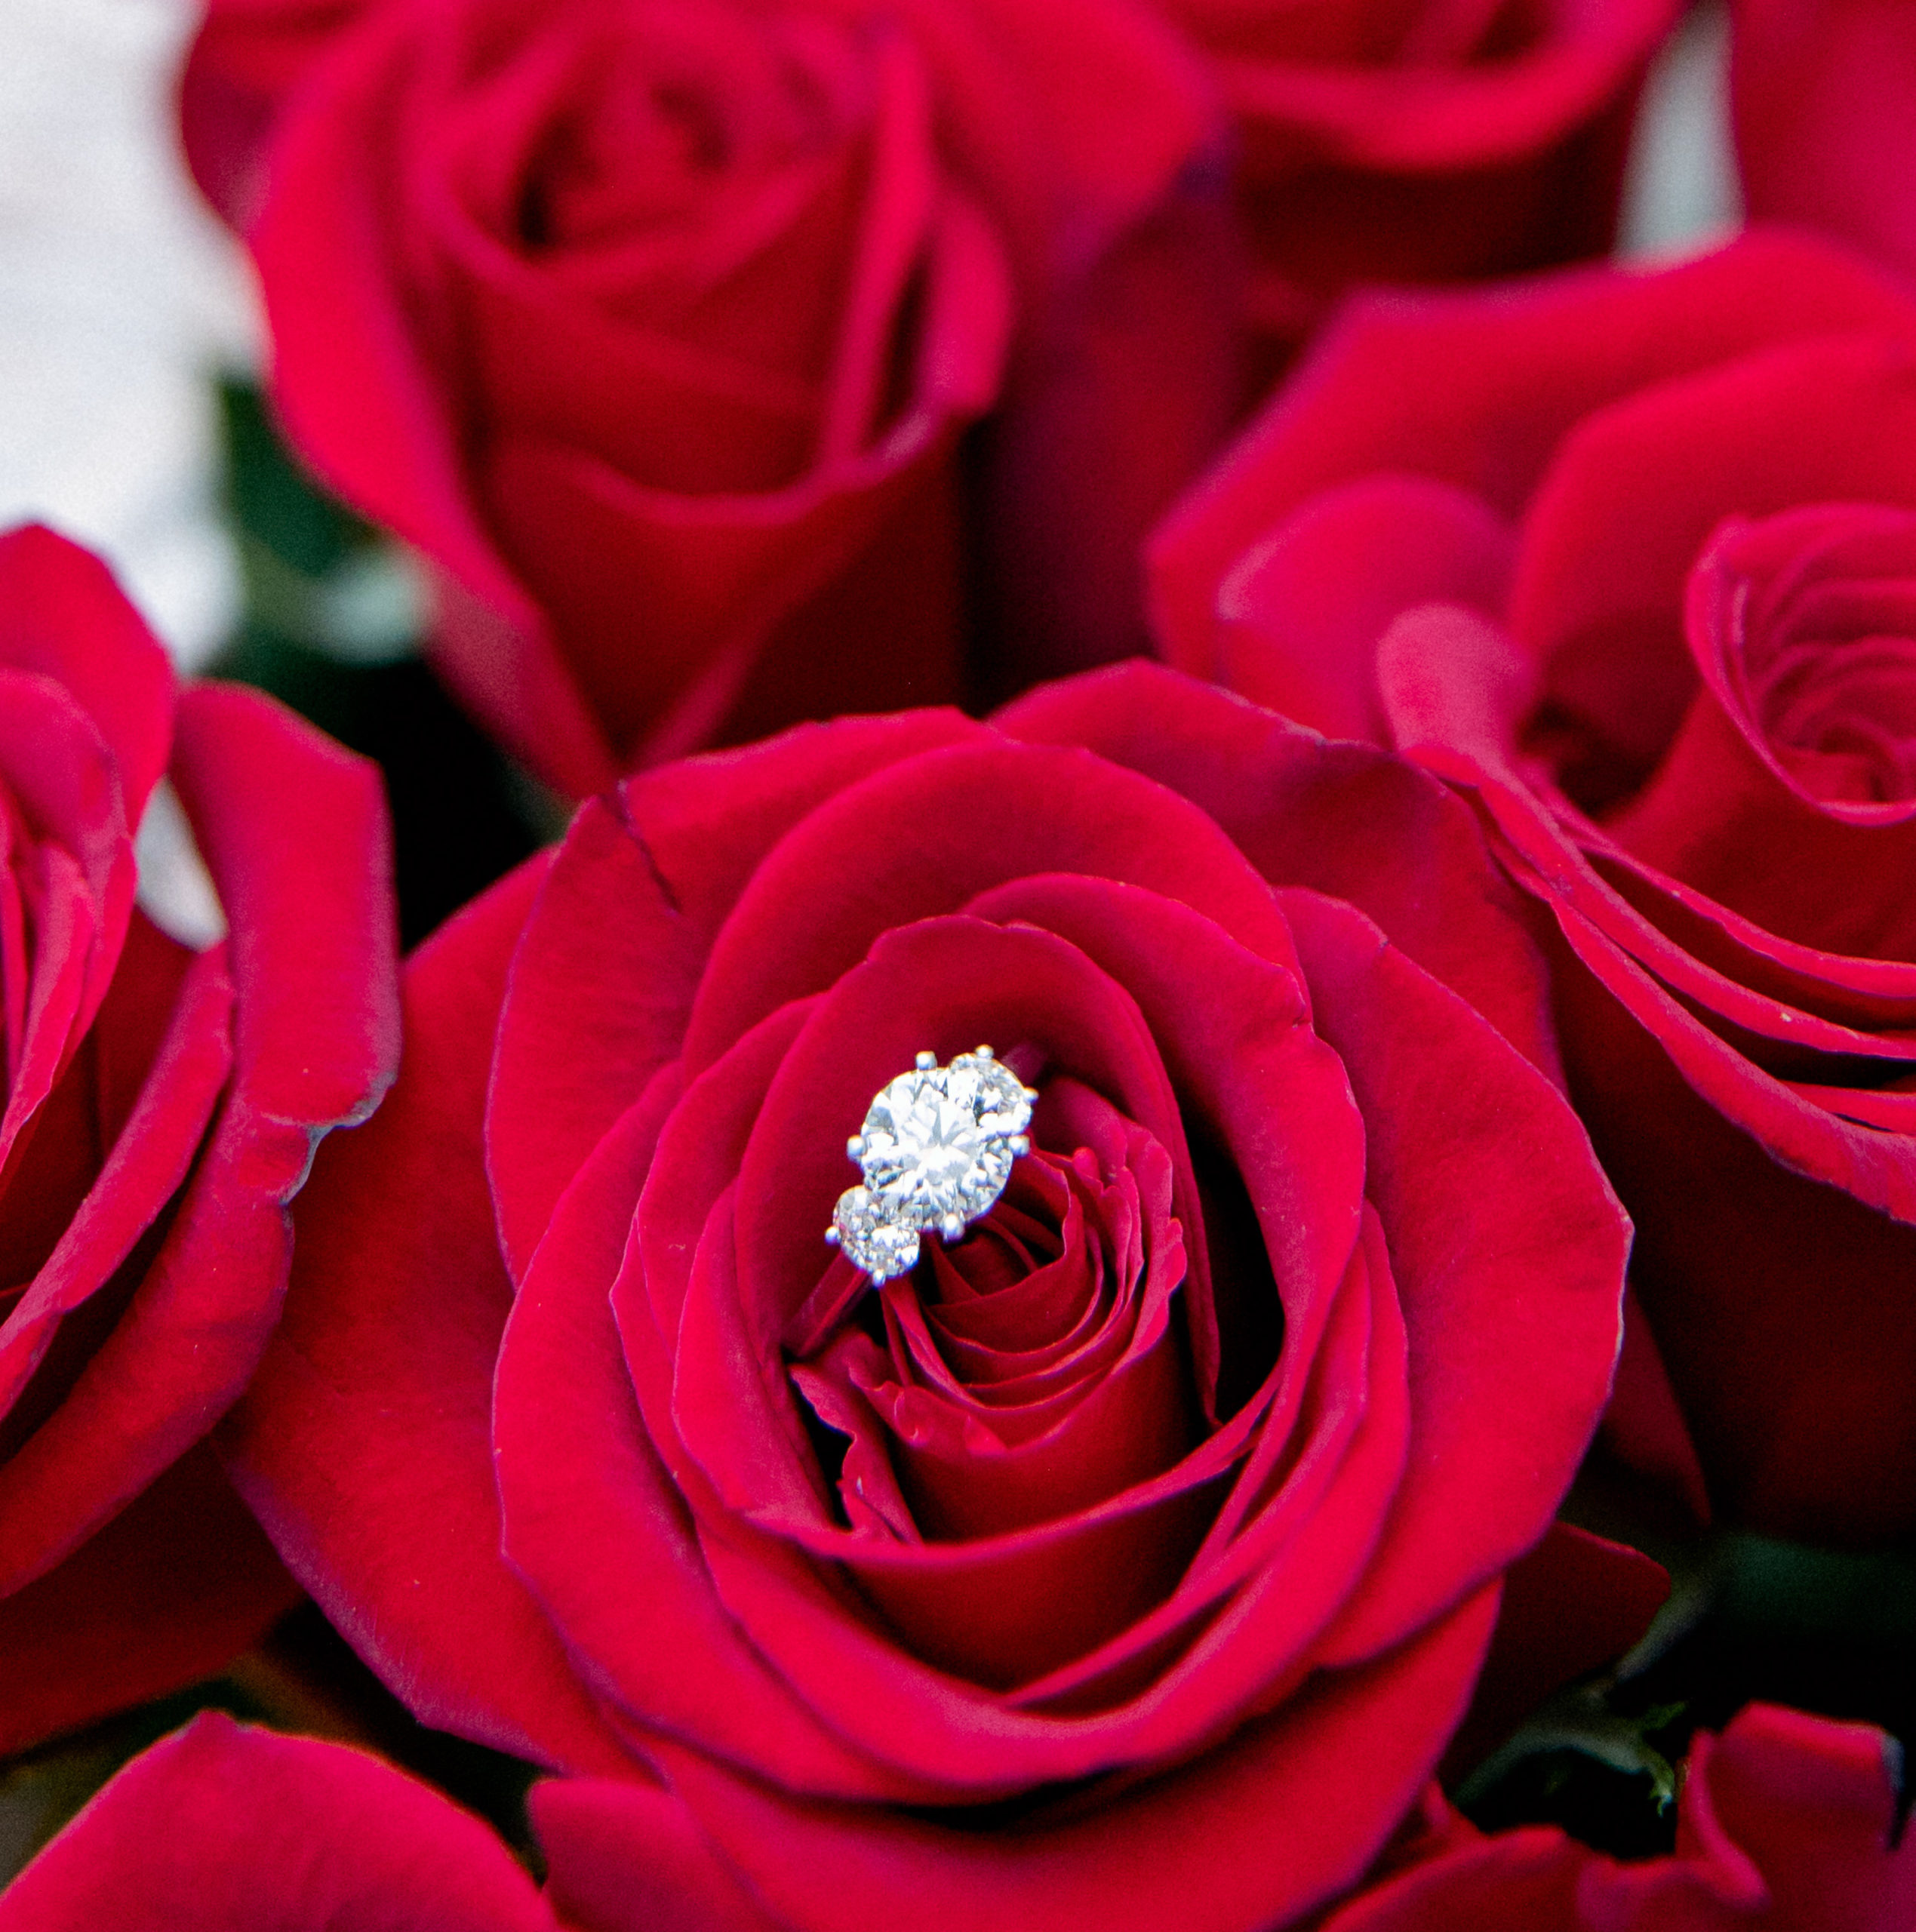 engagement ring set in red roses